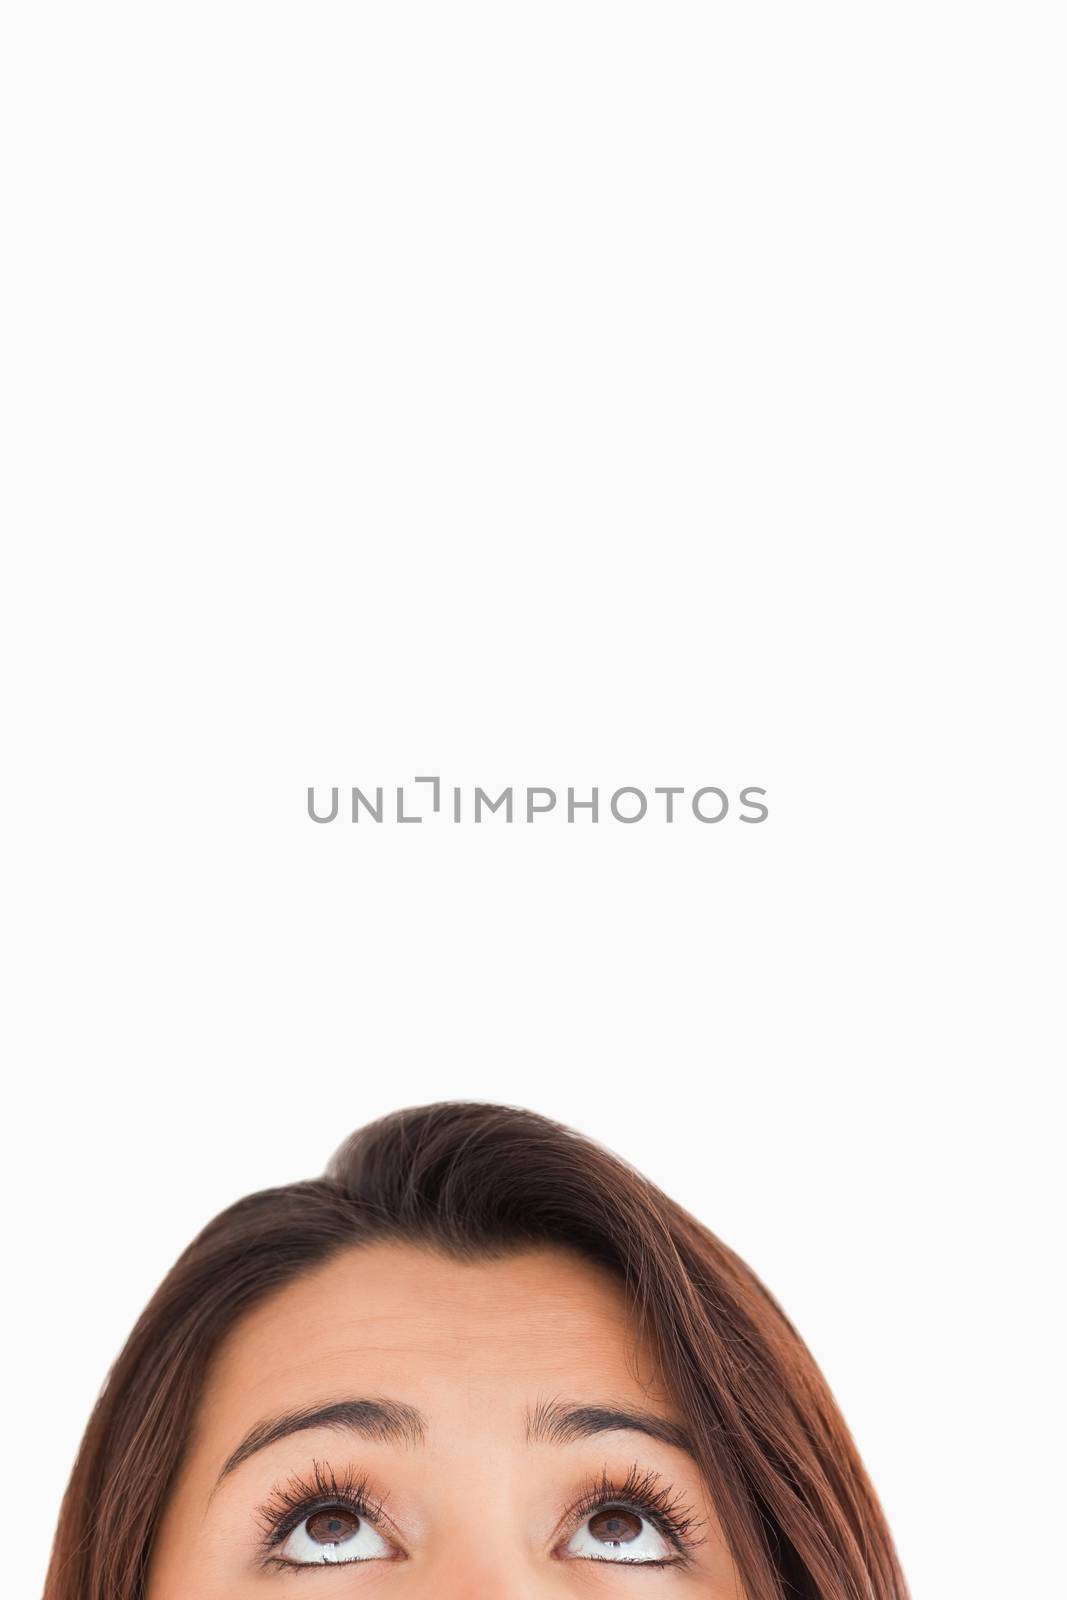 Woman eyes looking up while standing against a white background